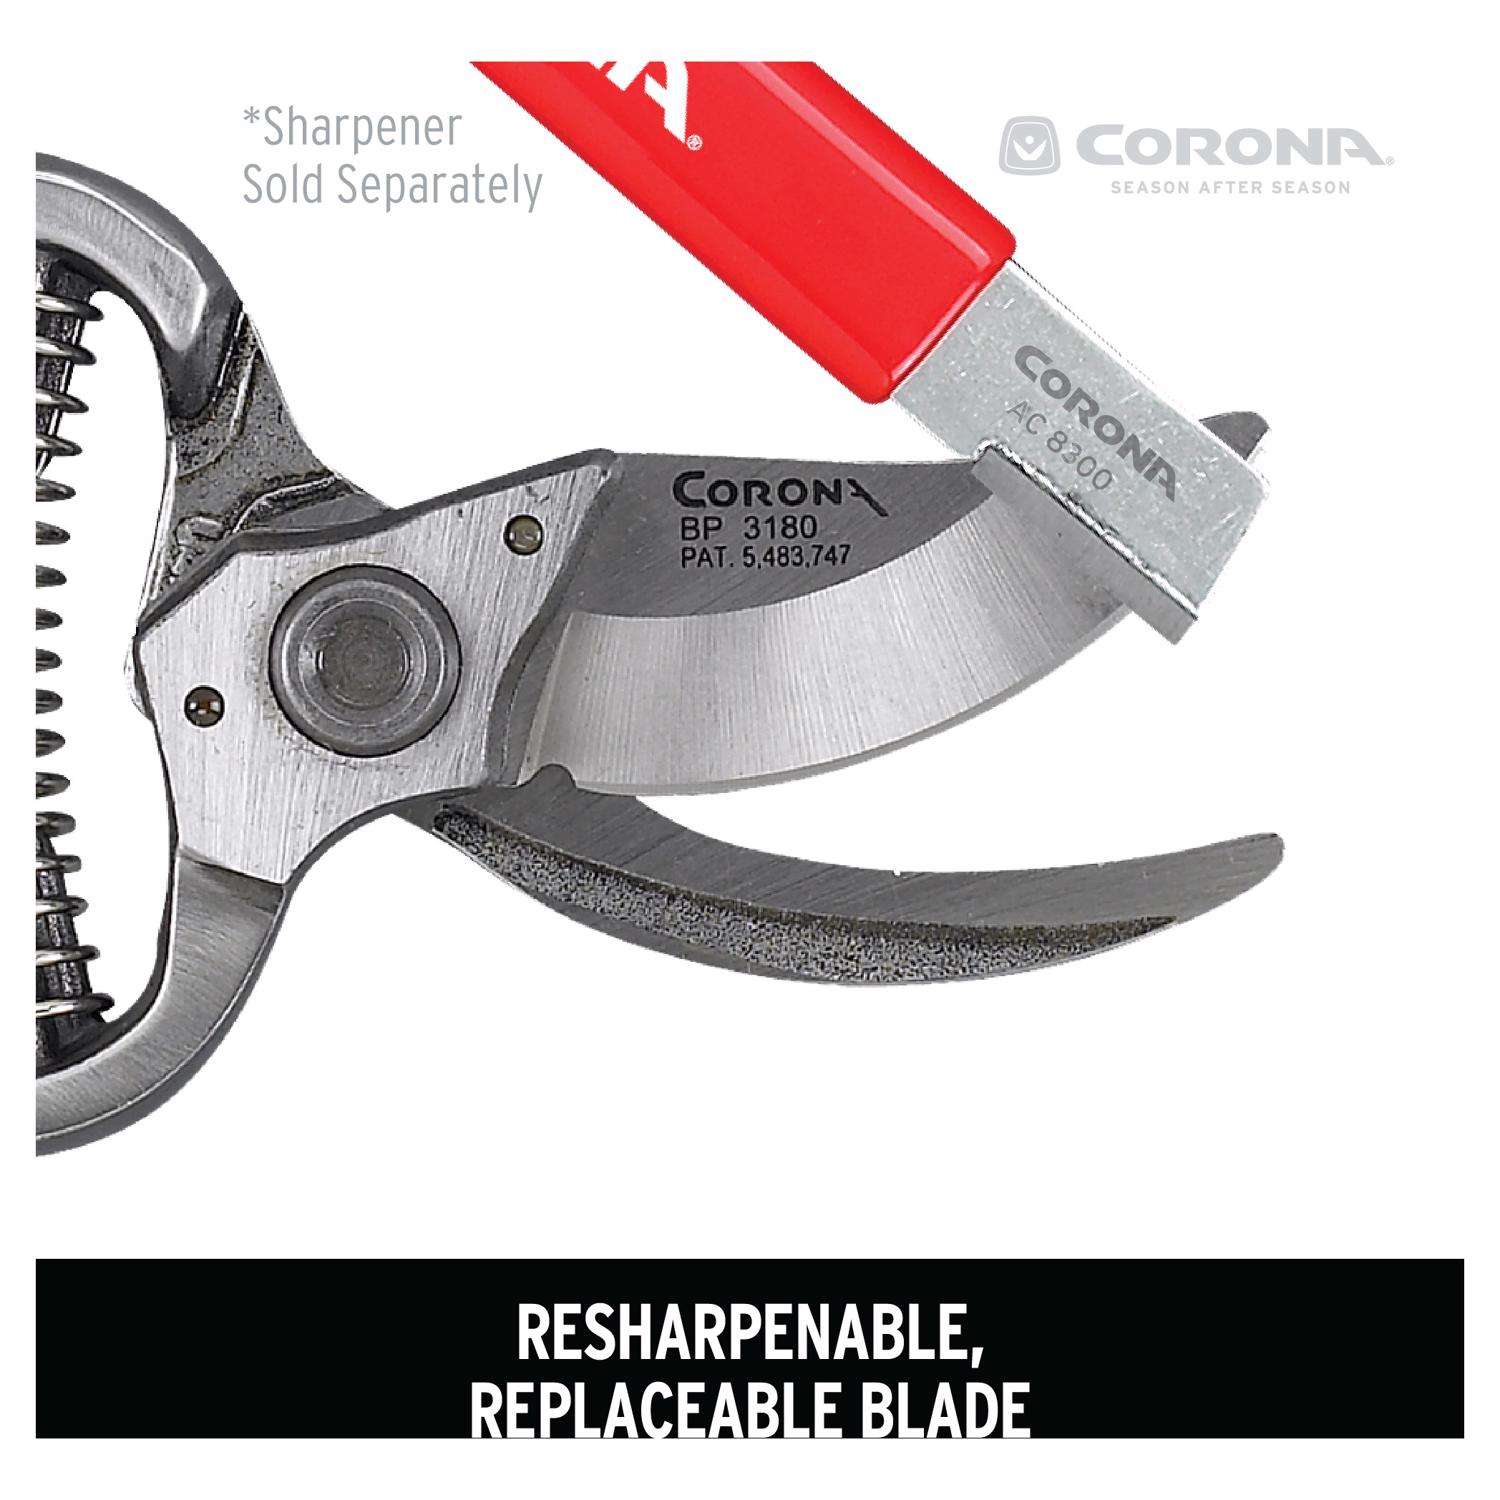 How to Sharpen Pruner or Lopper with Corona AC 8300 Sharpening